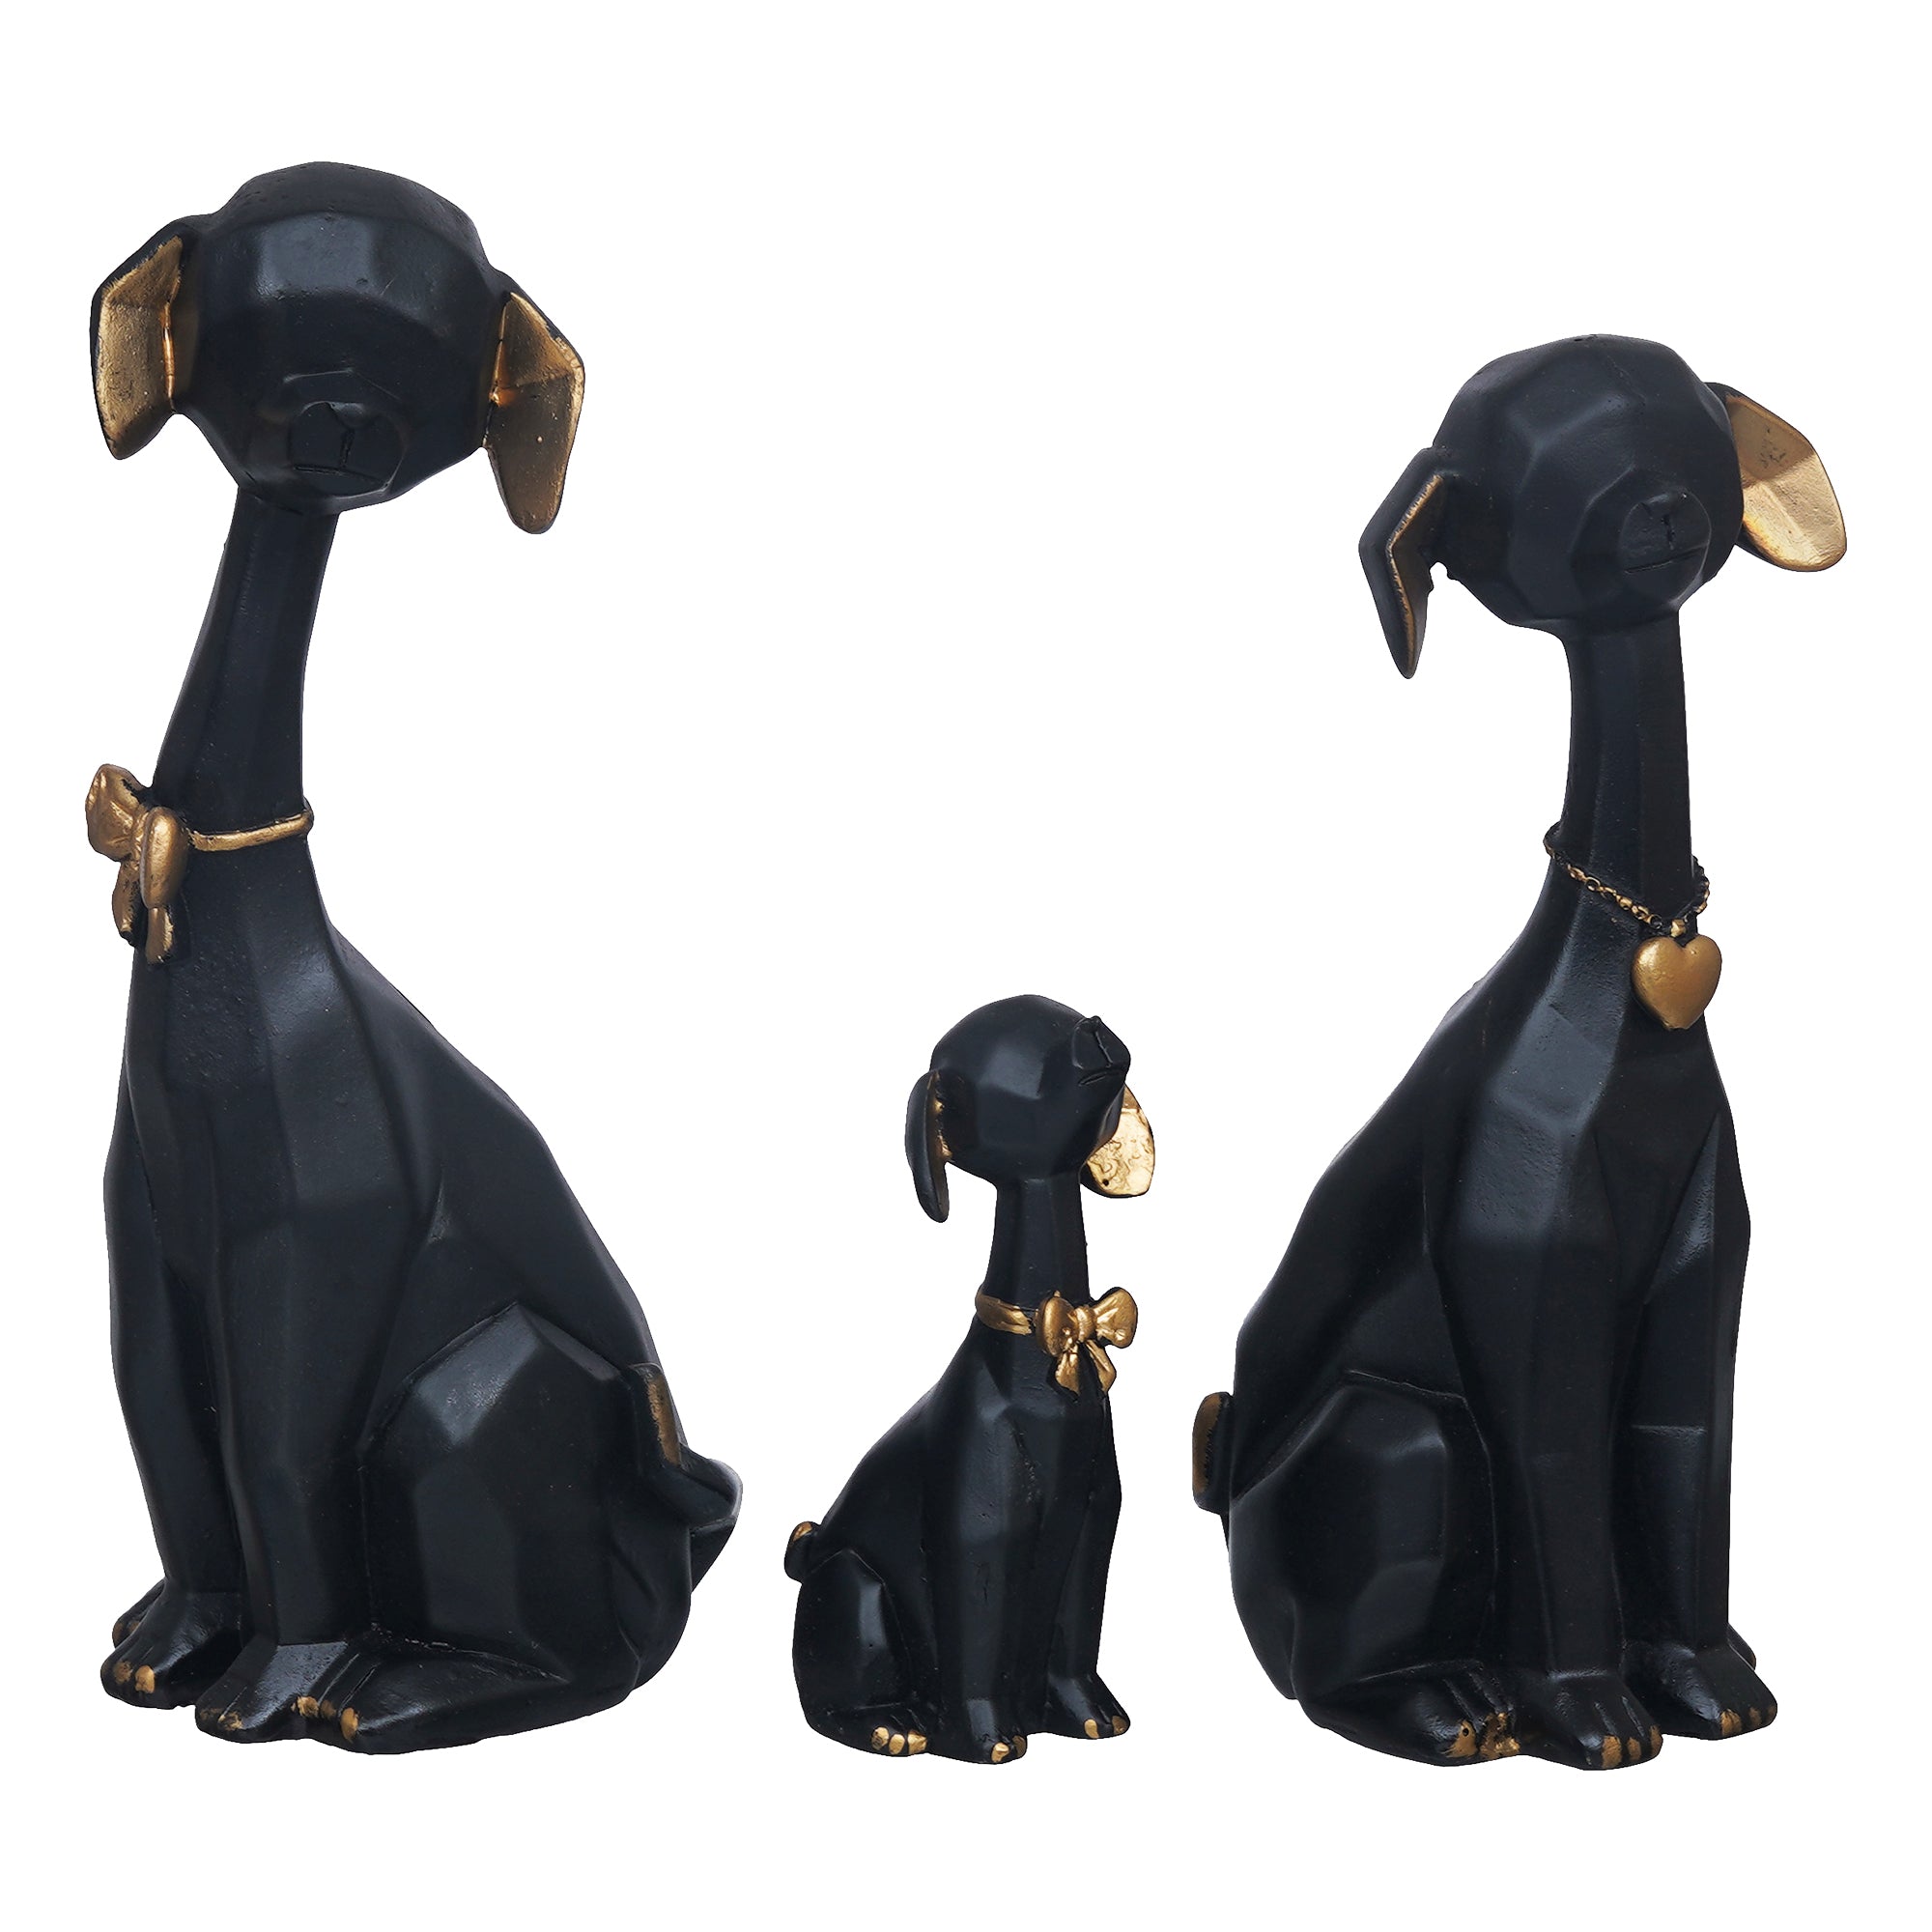 eCraftIndia Black and Golden Set of 3 Cute Dog Statues Animal Figurines Decorative Showpieces for Home Decor 7